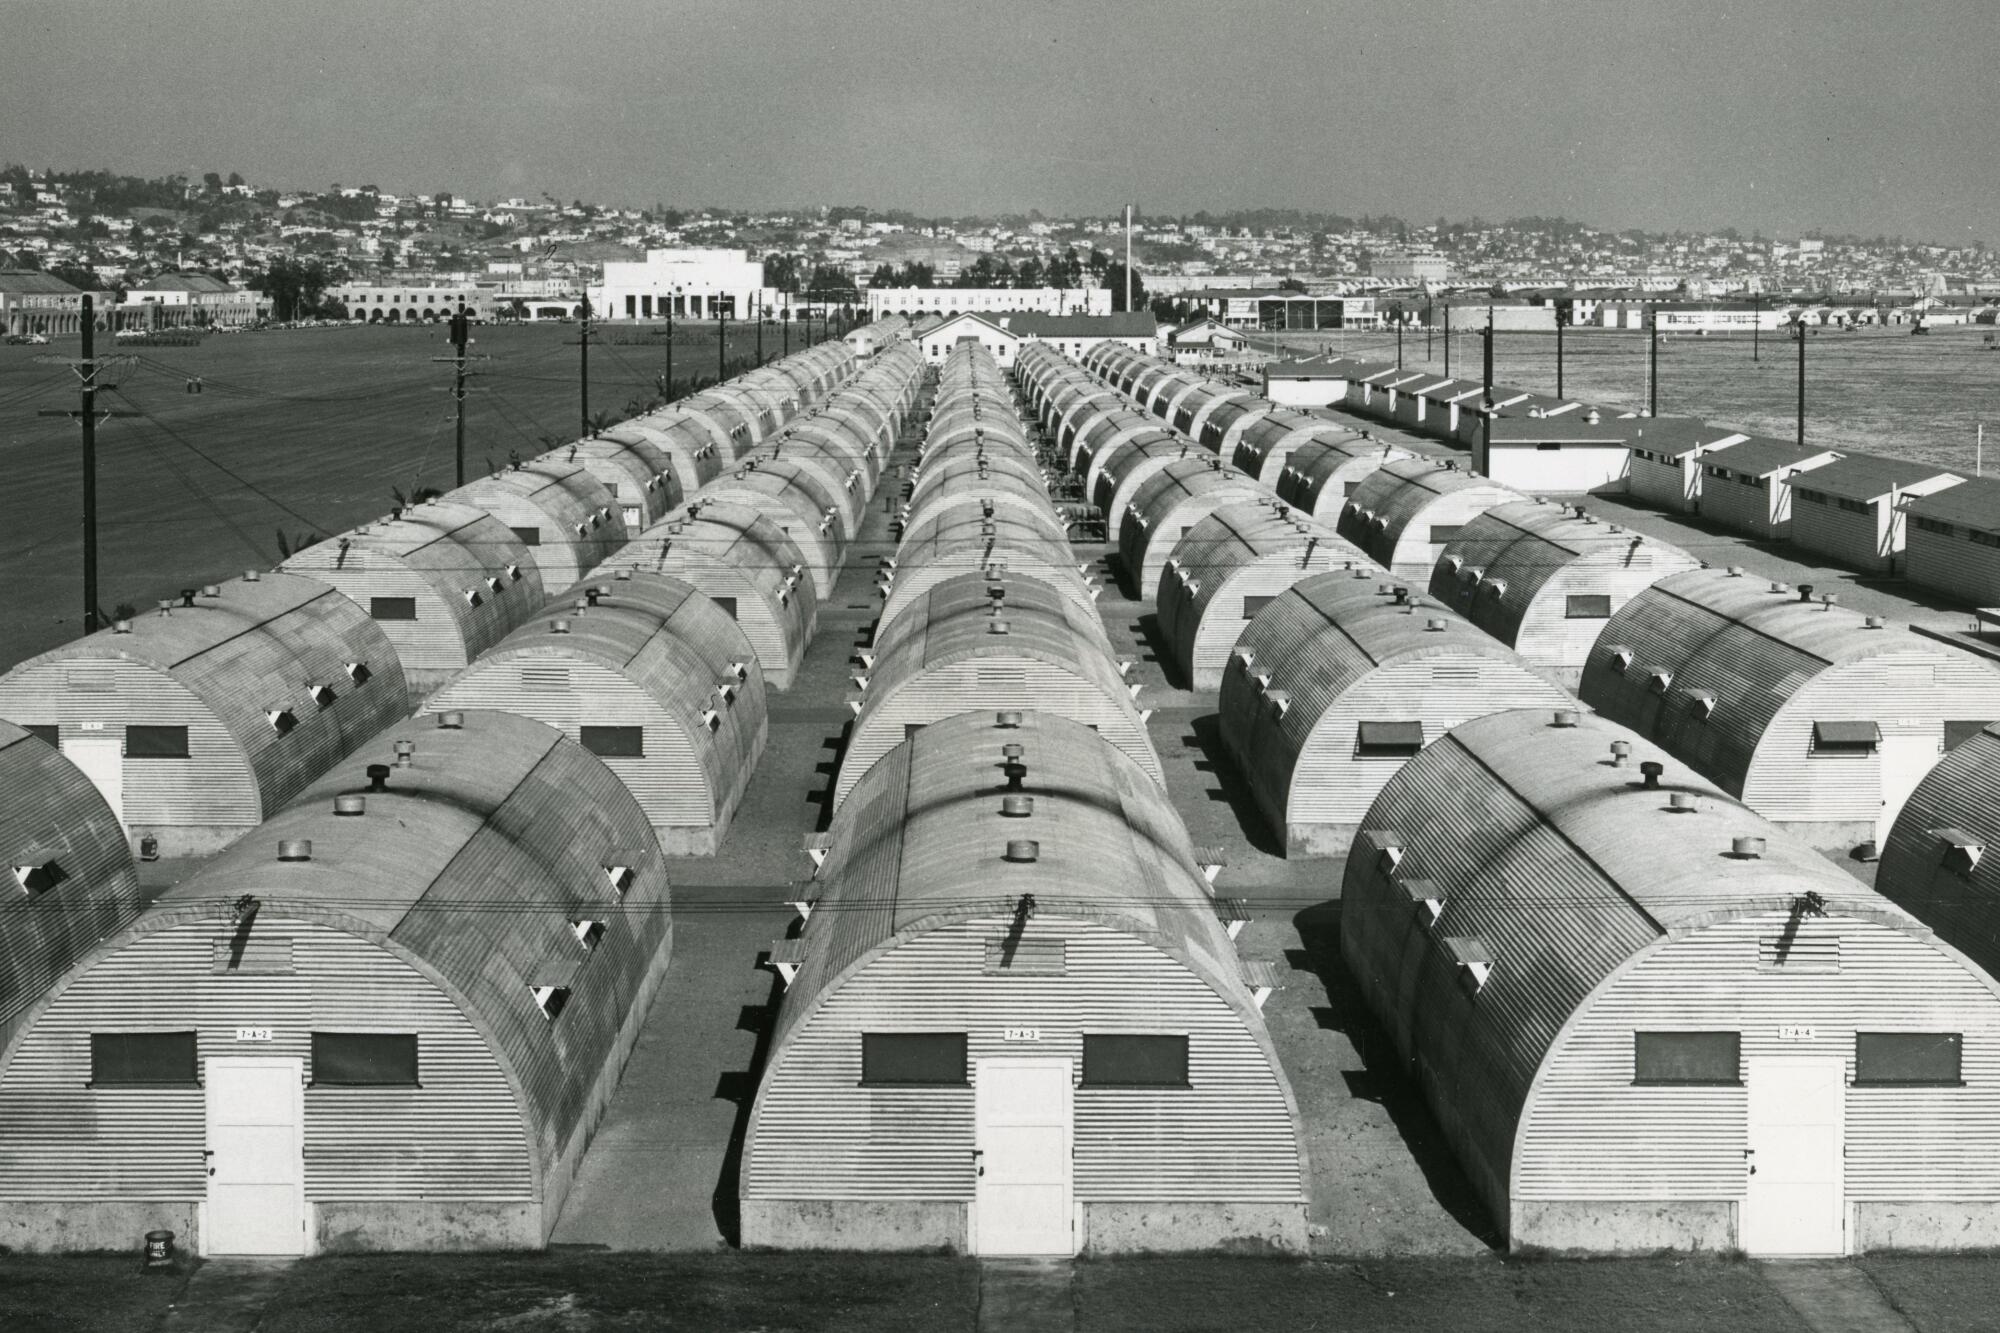 Long rows of quonset huts 